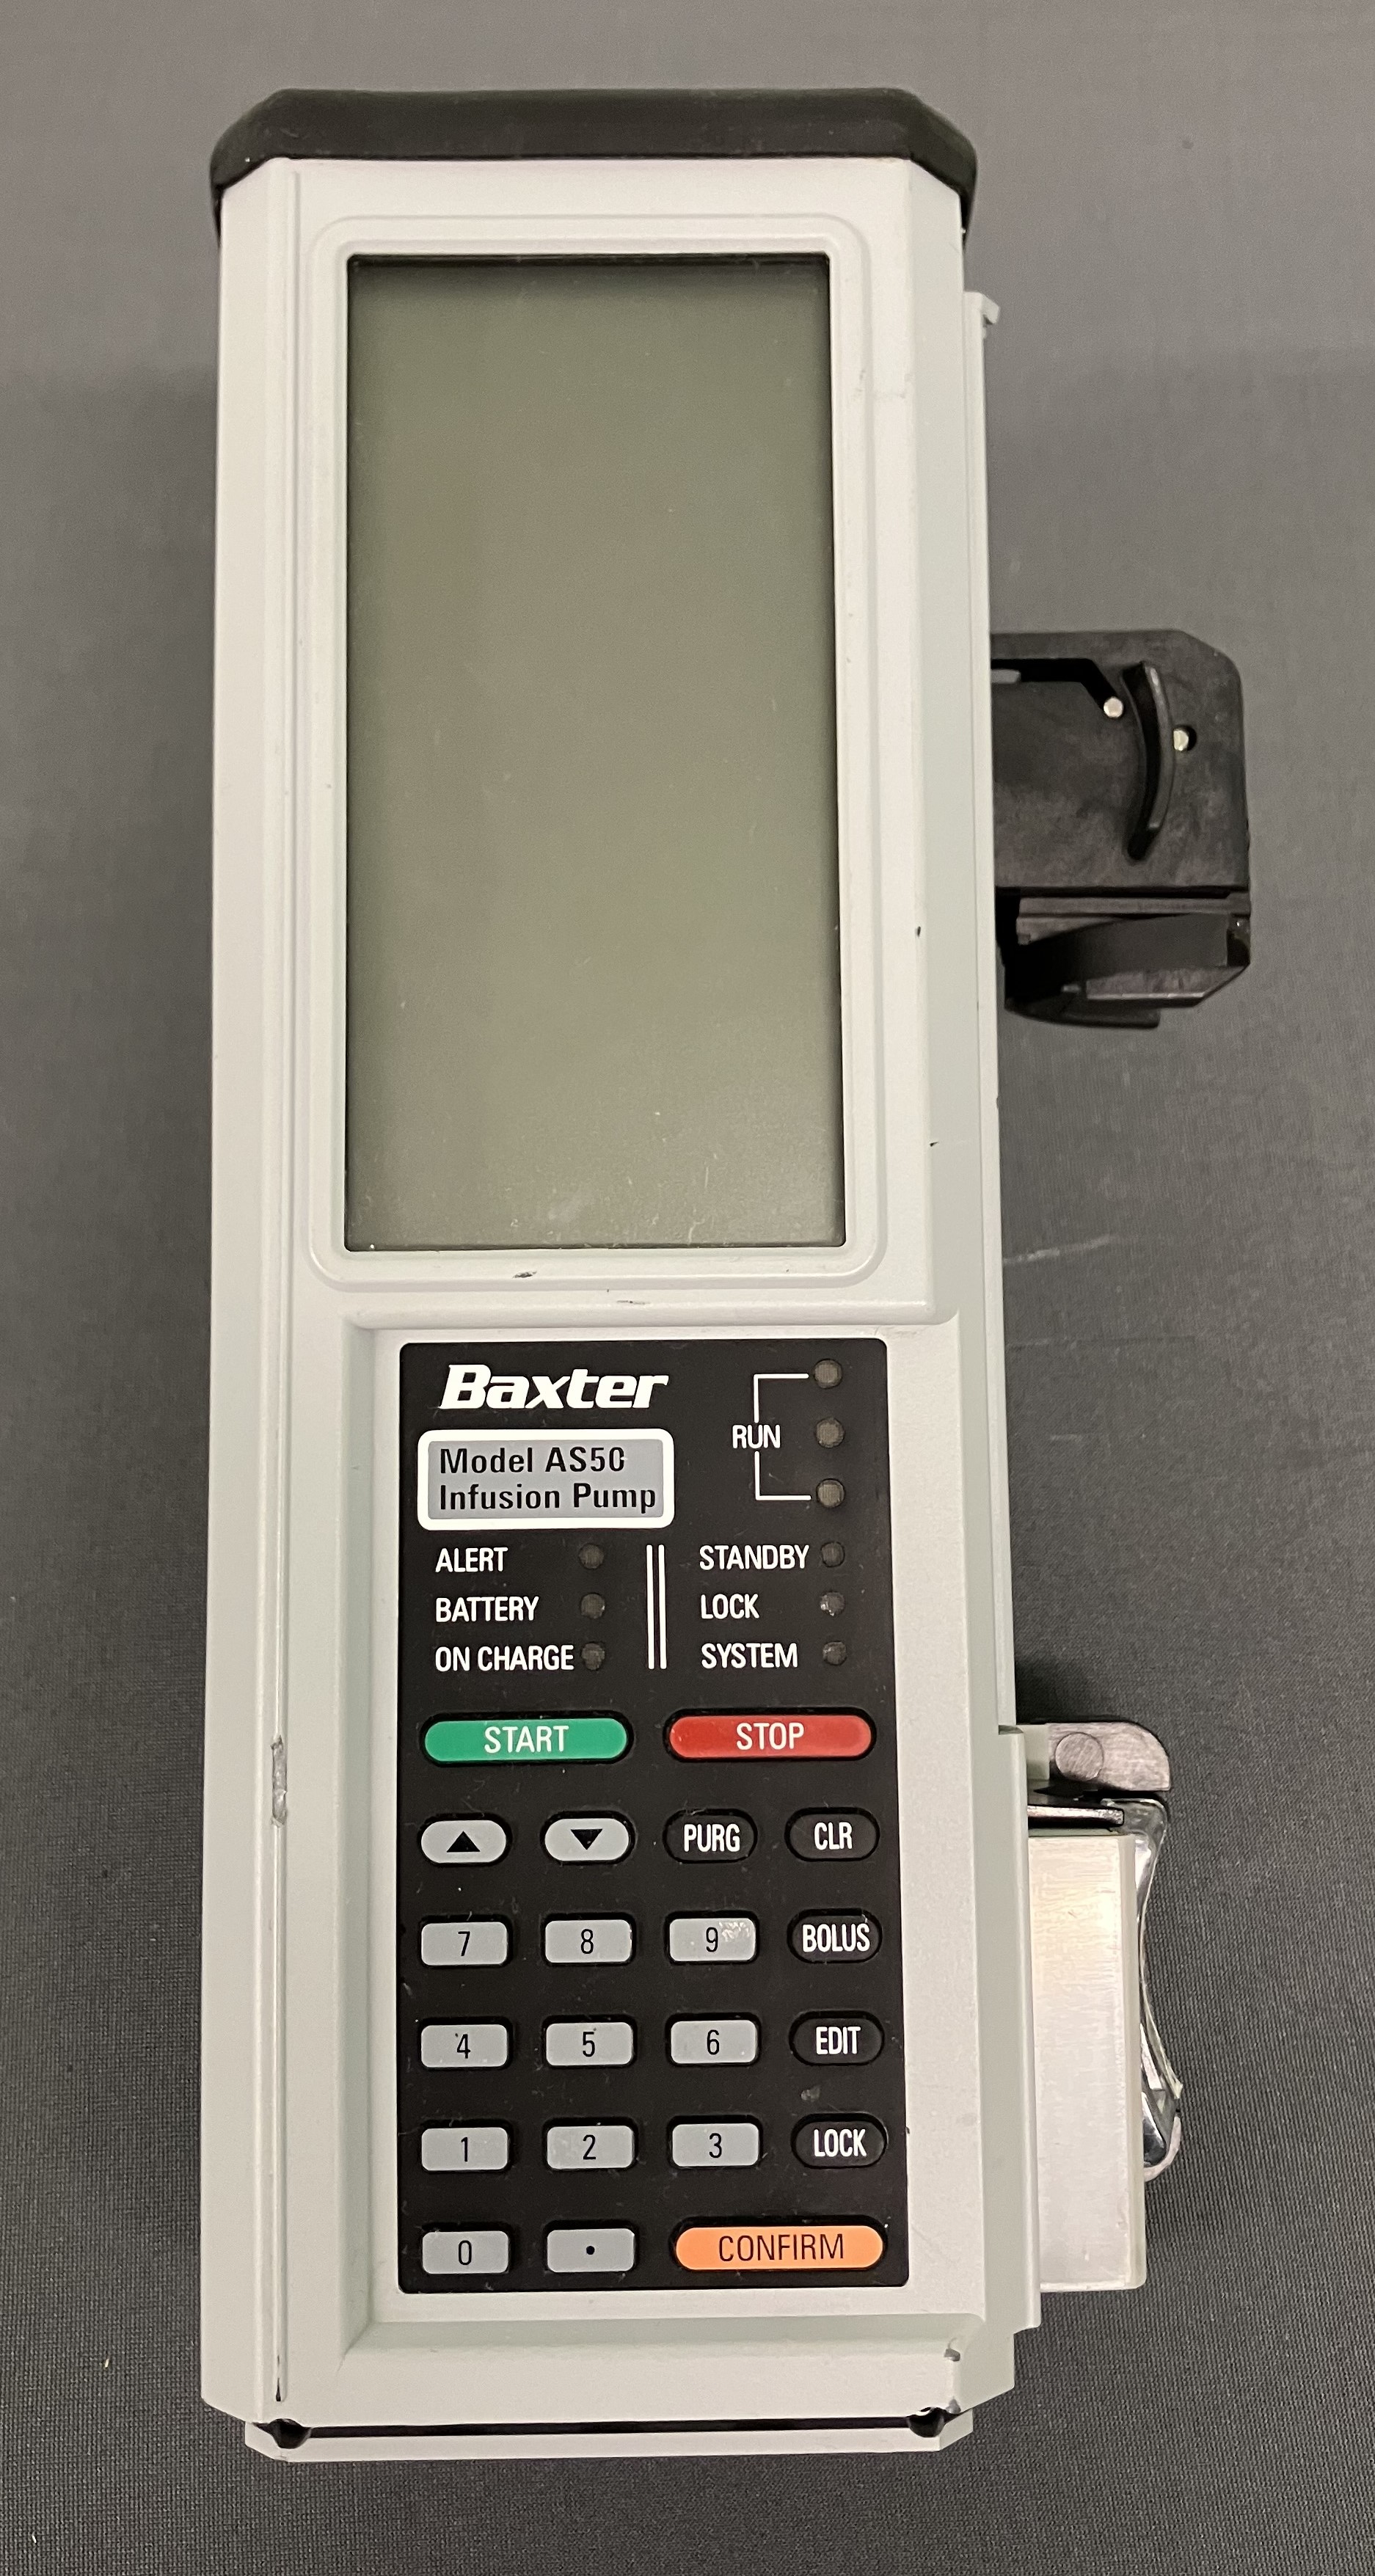 Baxter Model AS50 Auto Syringe Infusion Pump